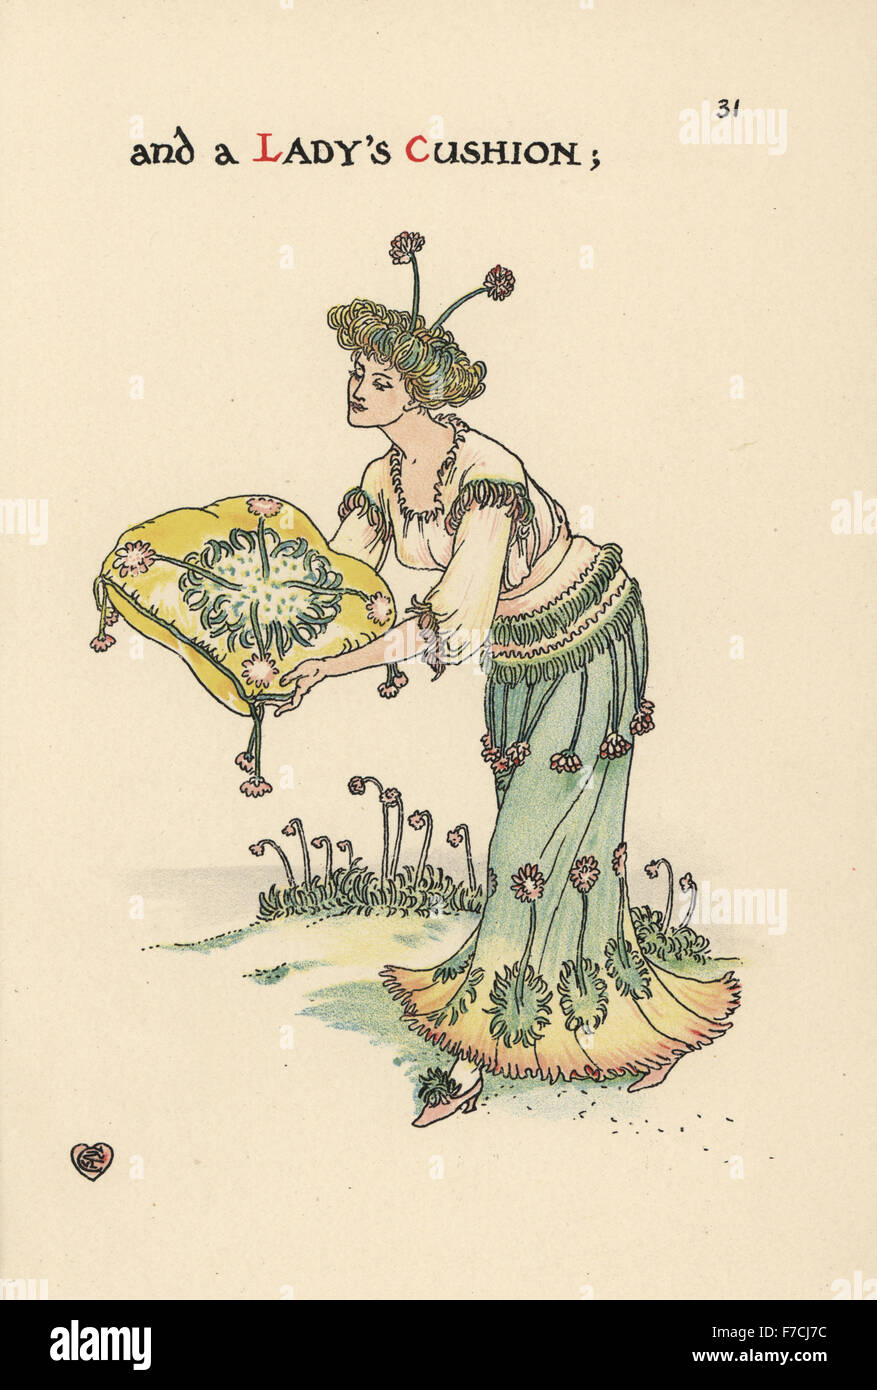 Flower fairy of lady's cushion, Armeria maritima, carrying a cushion with flower embroidery and tassles, and wearing a headdress and dress of flowers. Chromolithograph after an illustration by Walter Crane from A Flower Wedding, Cassell, London, 1905. Stock Photo